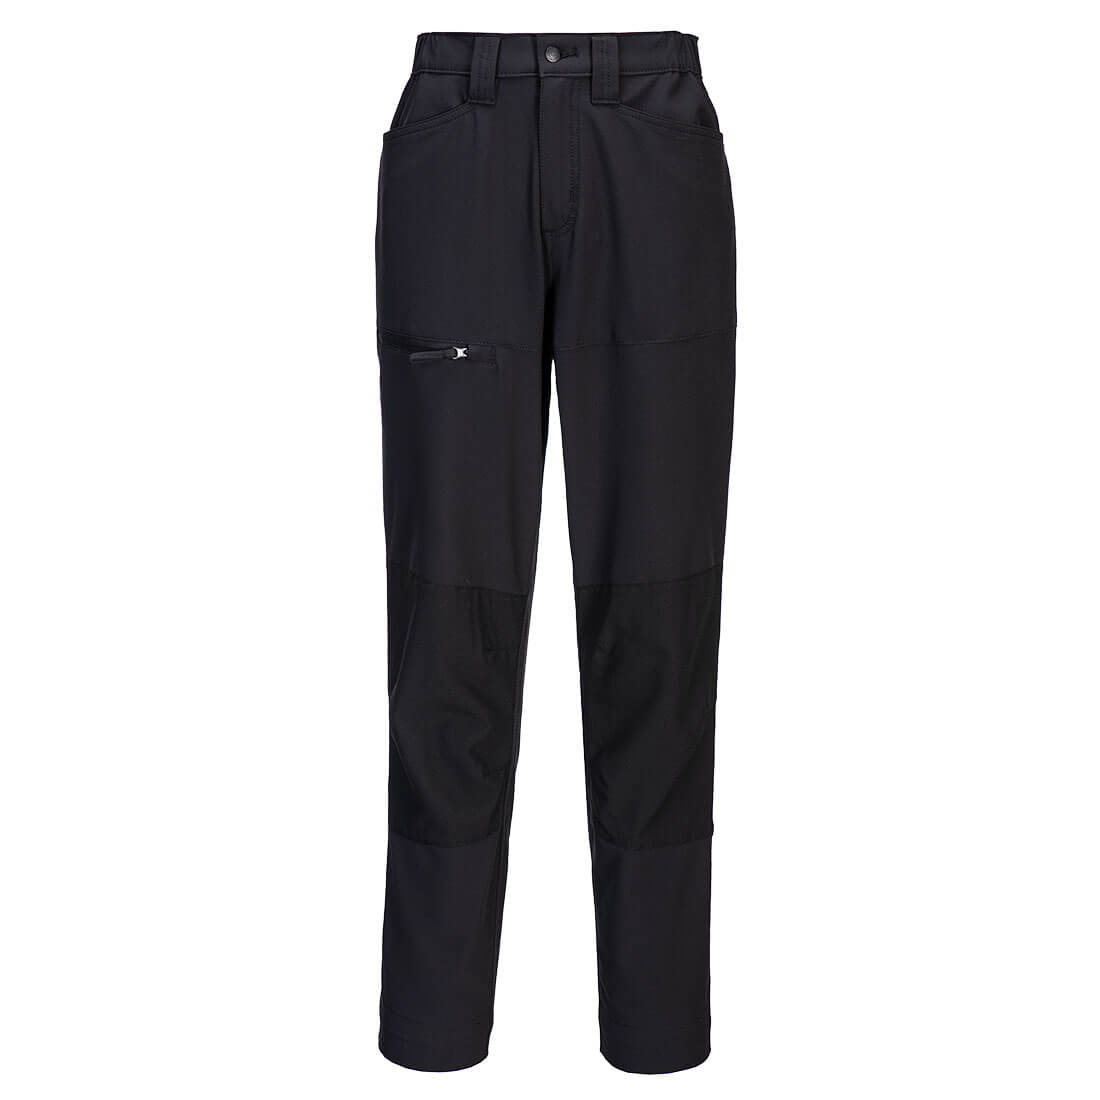 Eco Womens Stretch Work Trousers 